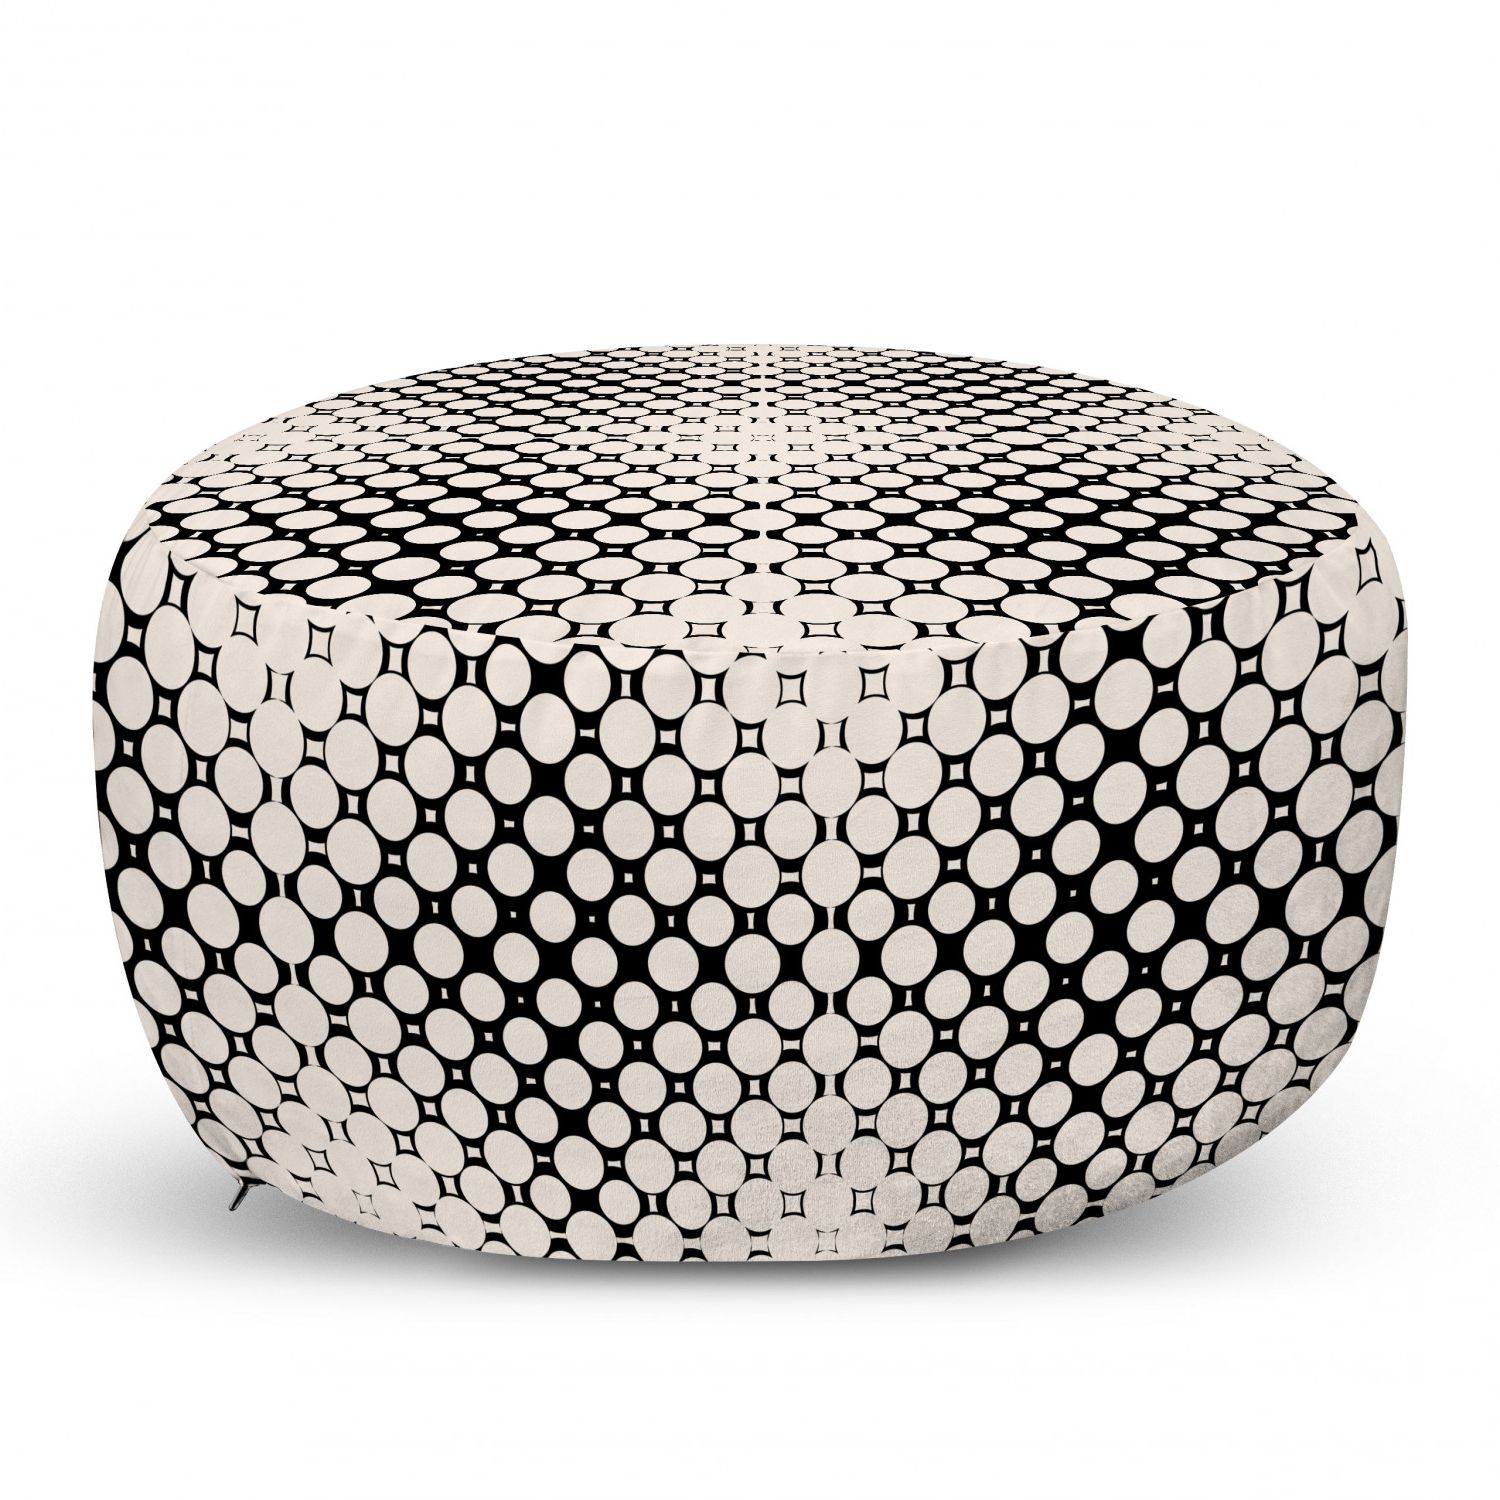 Well Known Geometric Ottoman Pouf, Continuing Illustration Of Abstract Circles Squares  And Dots, Decorative Soft Foot Rest With Removable Cover Living Room And  Bedroom, Eggshell Charcoal Grey,ambesonne – Walmart With Charcoal Dot Ottomans (View 14 of 15)